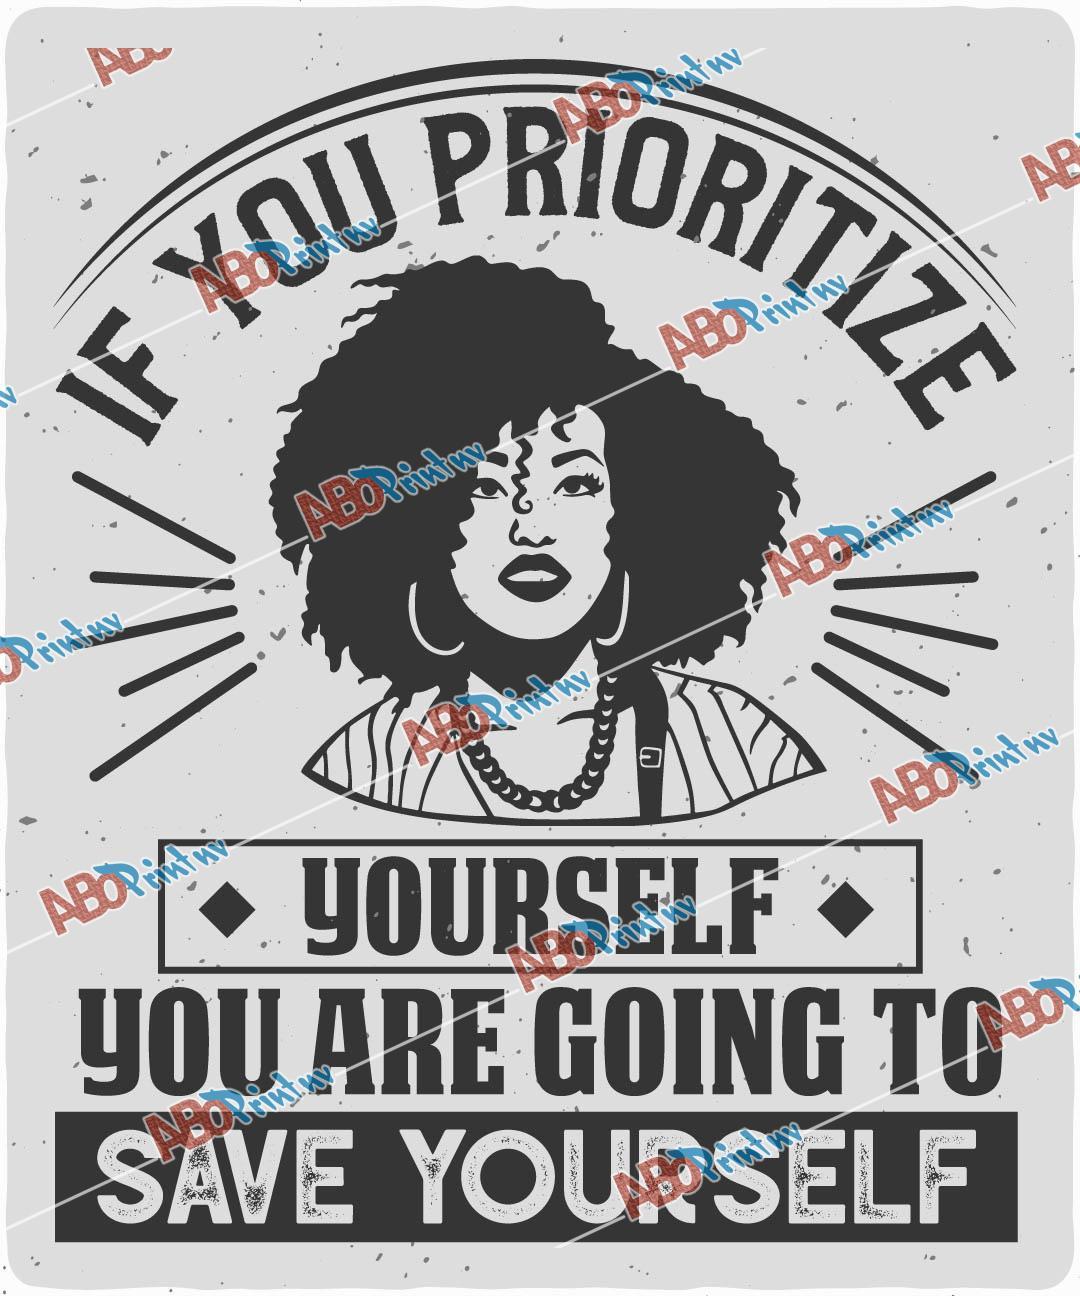 If you prioritize yourself, you are going to save yourself V2.jpg